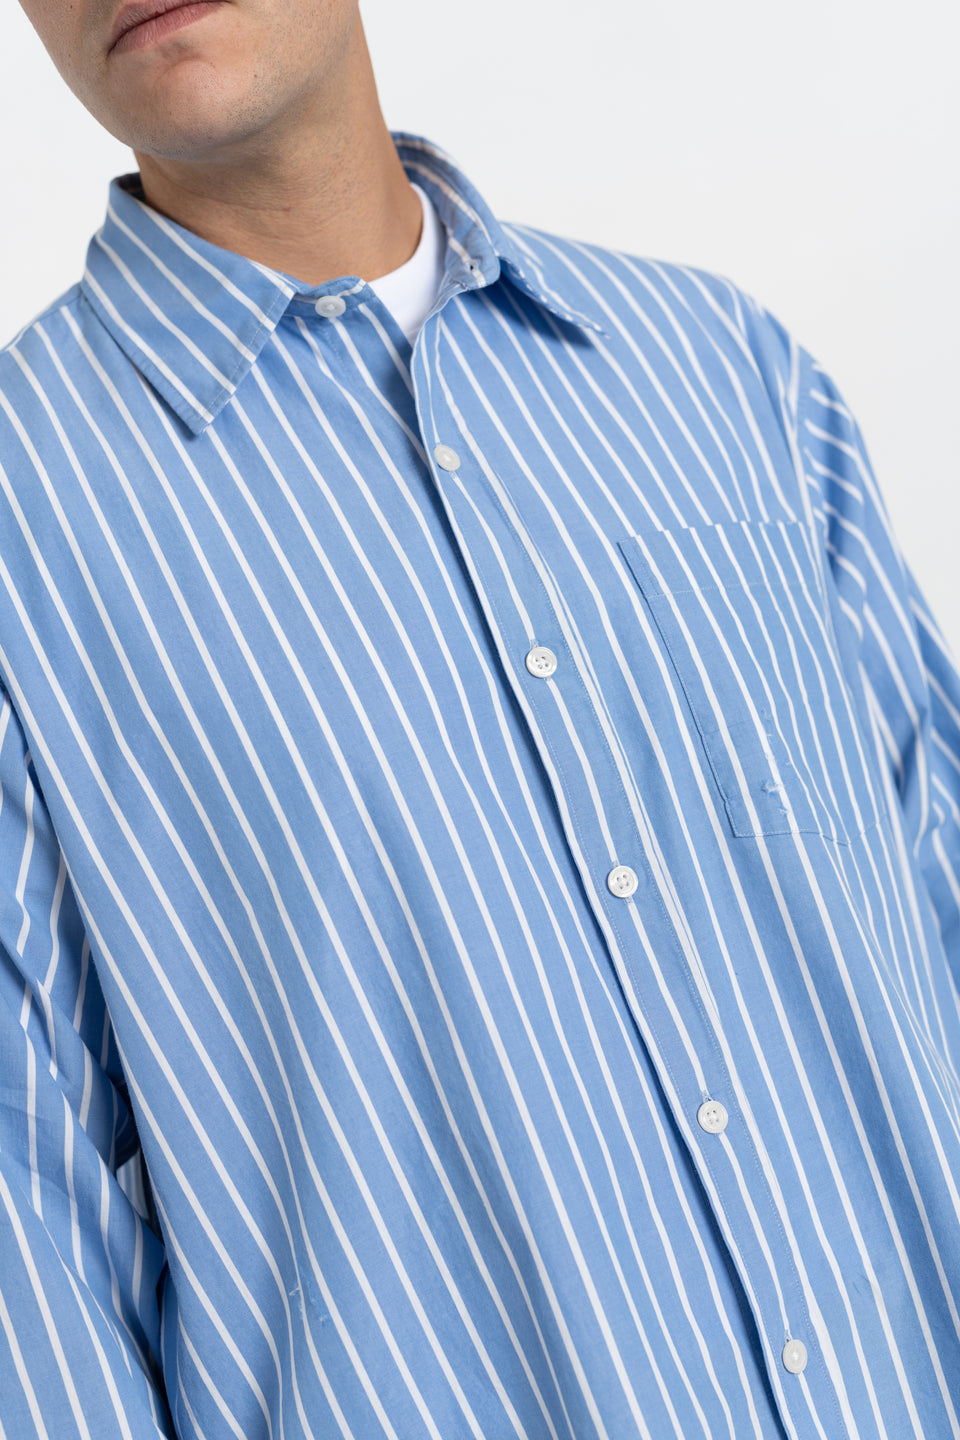 mfpen AW23 or FW23 Men's Collection Destroyed Executive Shirt Blue Stripe Organic Cotton Calculus Victoria BC Canada